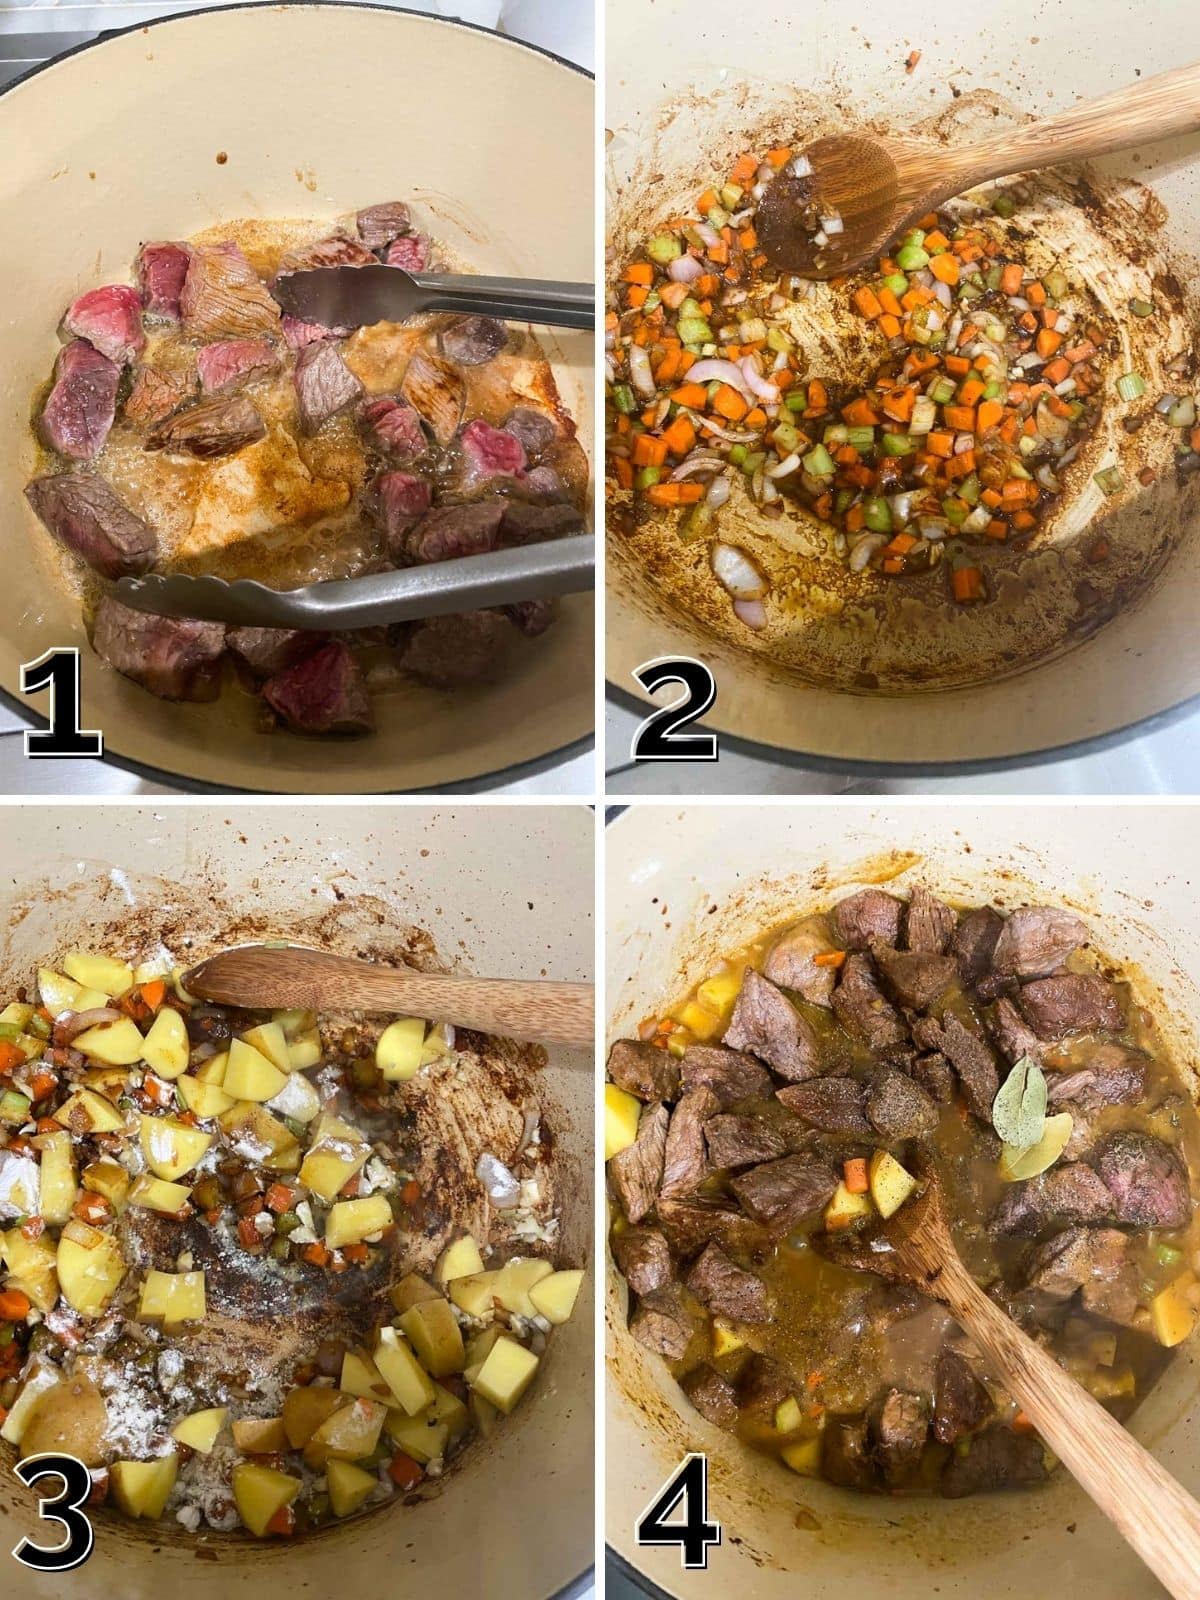 Step by step process photos for how to make a beef stew from pan searing the beef to stirring in the vegtables